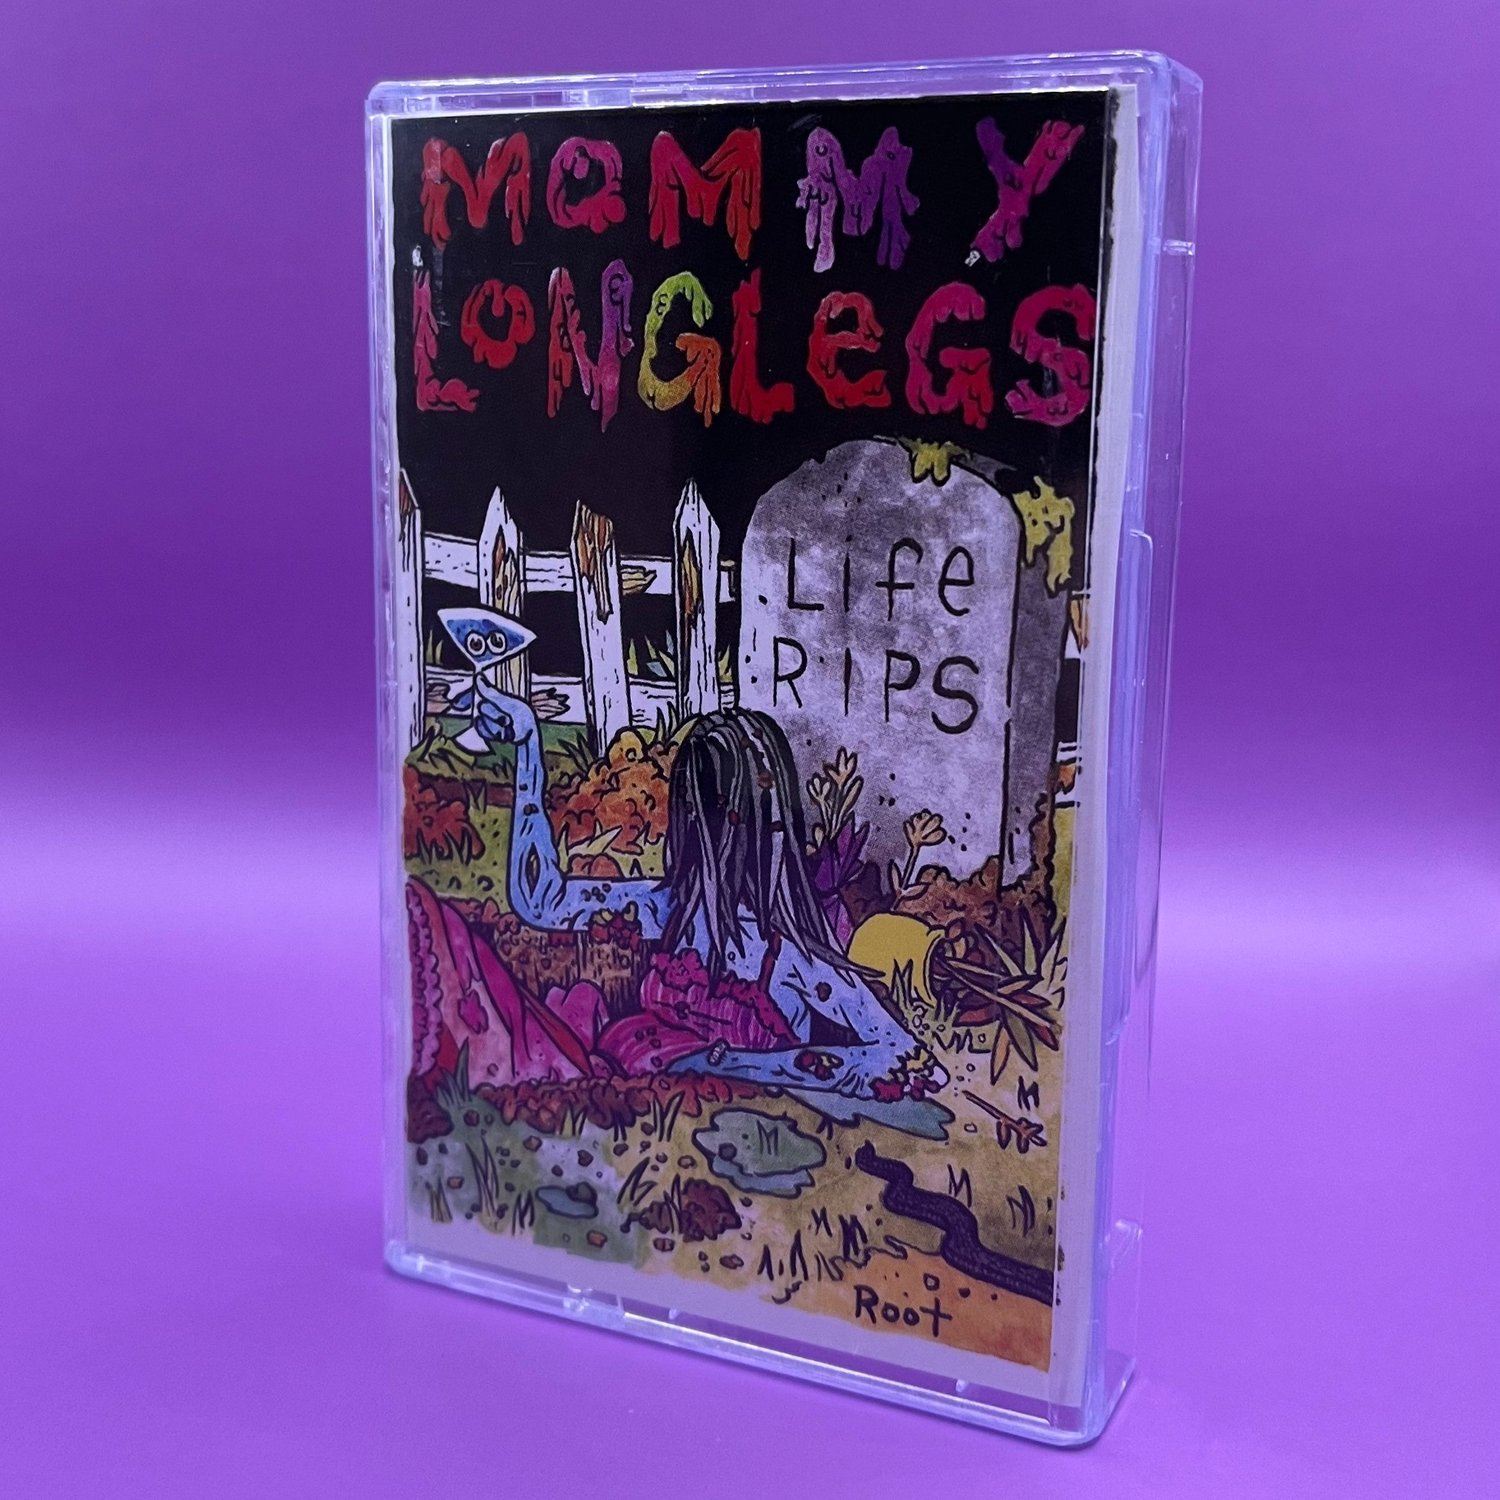 Mommy Long Legs - Life Rips / Assholes — Youth Riot Records